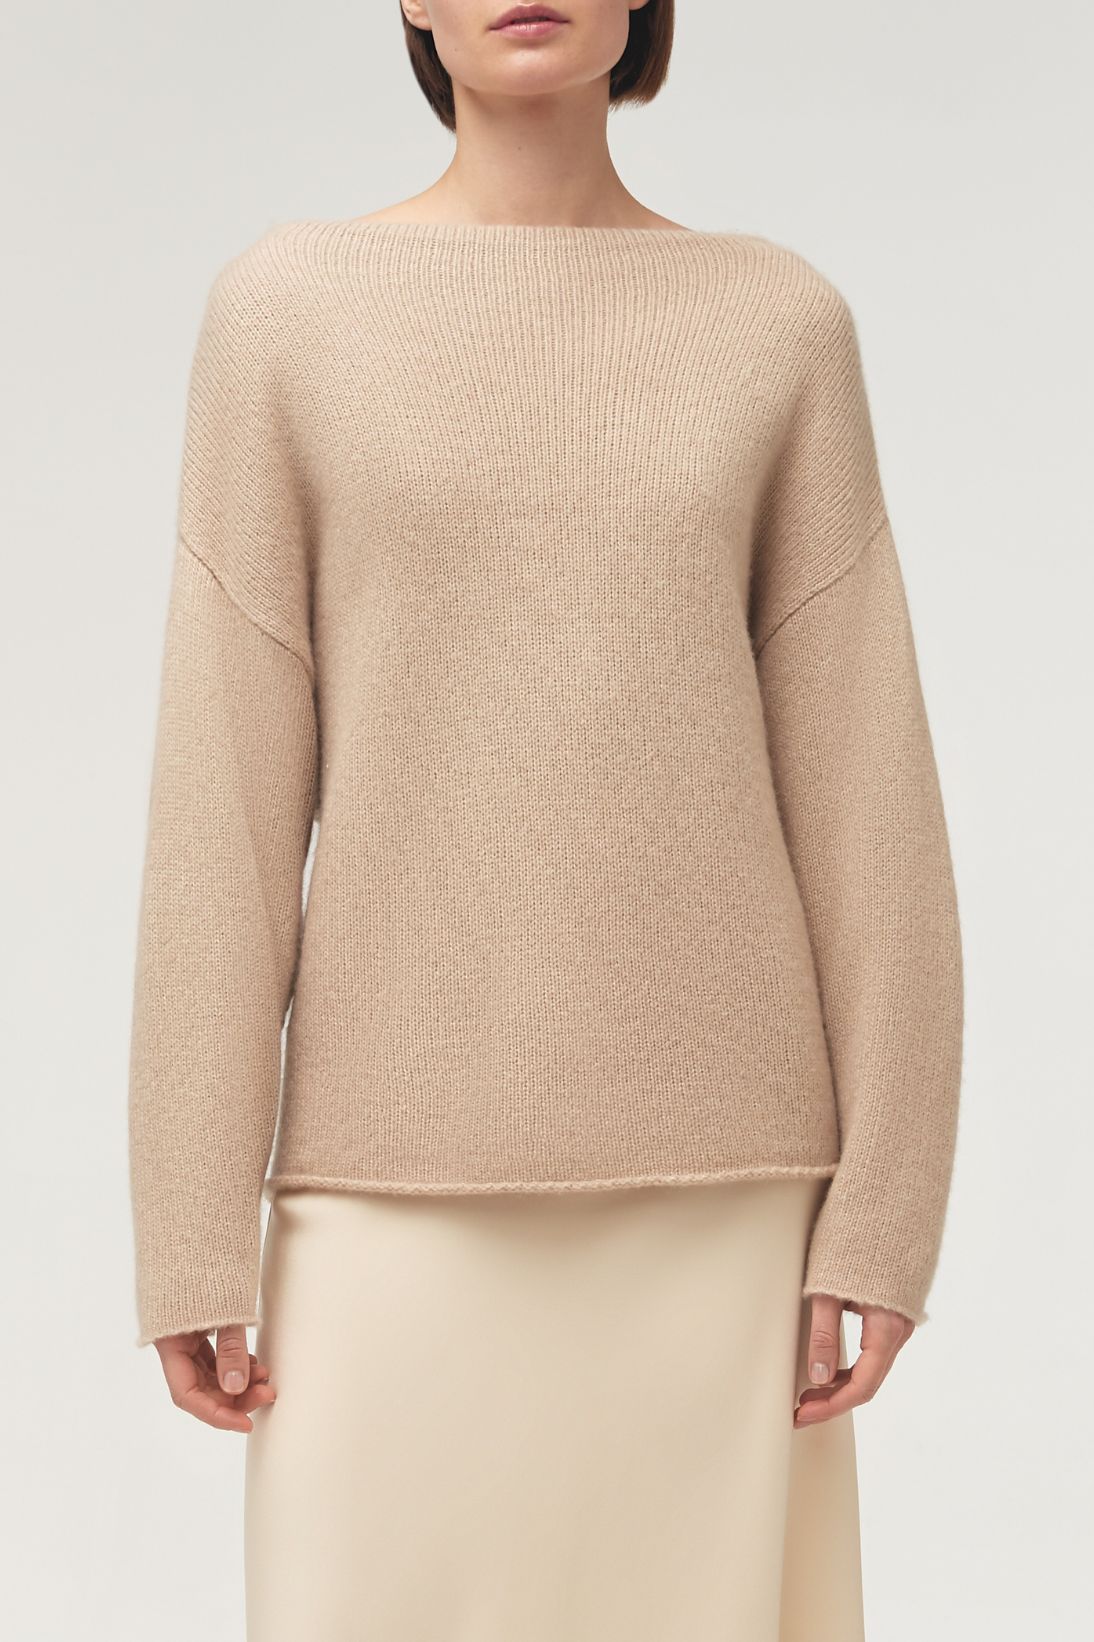 RELAXED SOFT NECK SWEATER